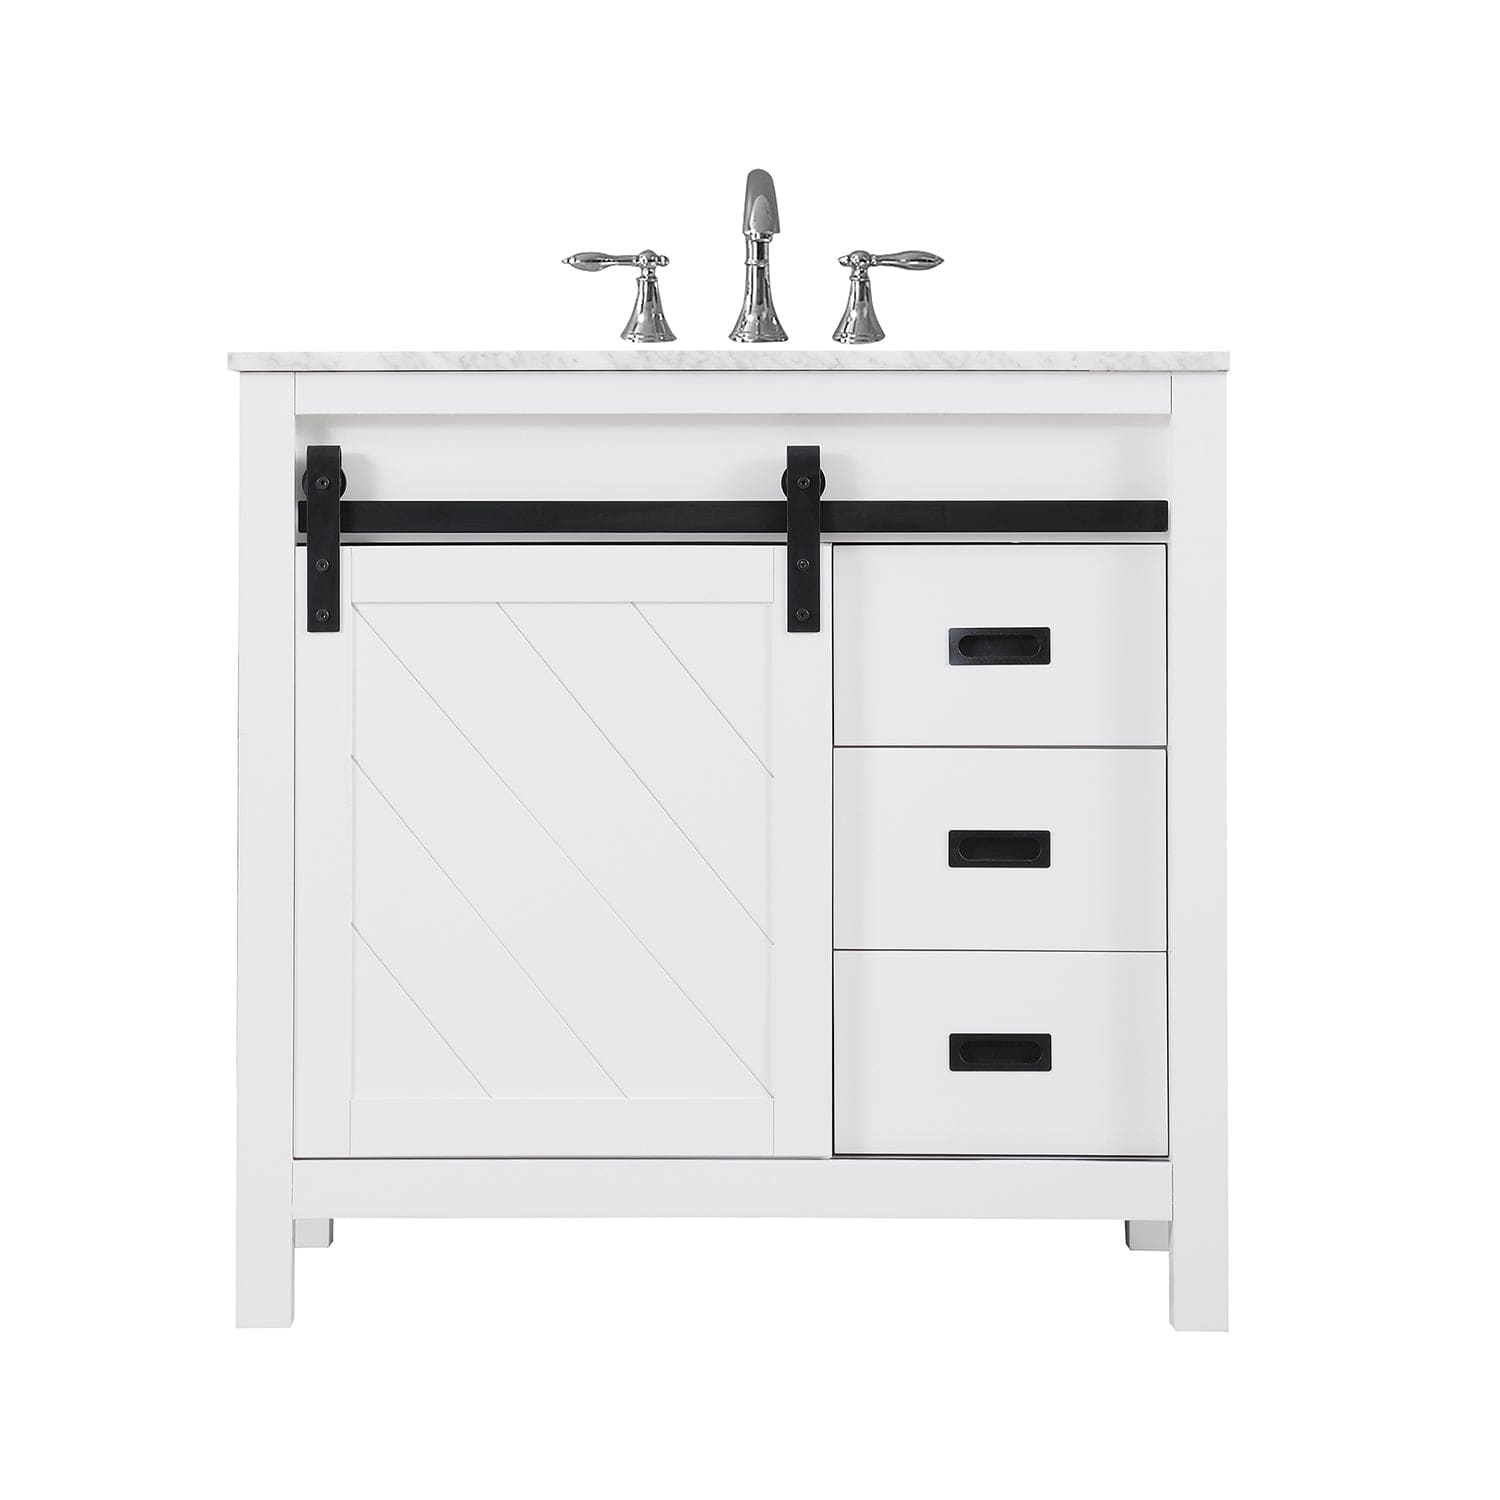 Altair Kinsley 36" Single Bathroom Vanity Set in White and Carrara White Marble Countertop without Mirror 536036-WH-CA-NM - Molaix631112970464Vanity536036-WH-CA-NM